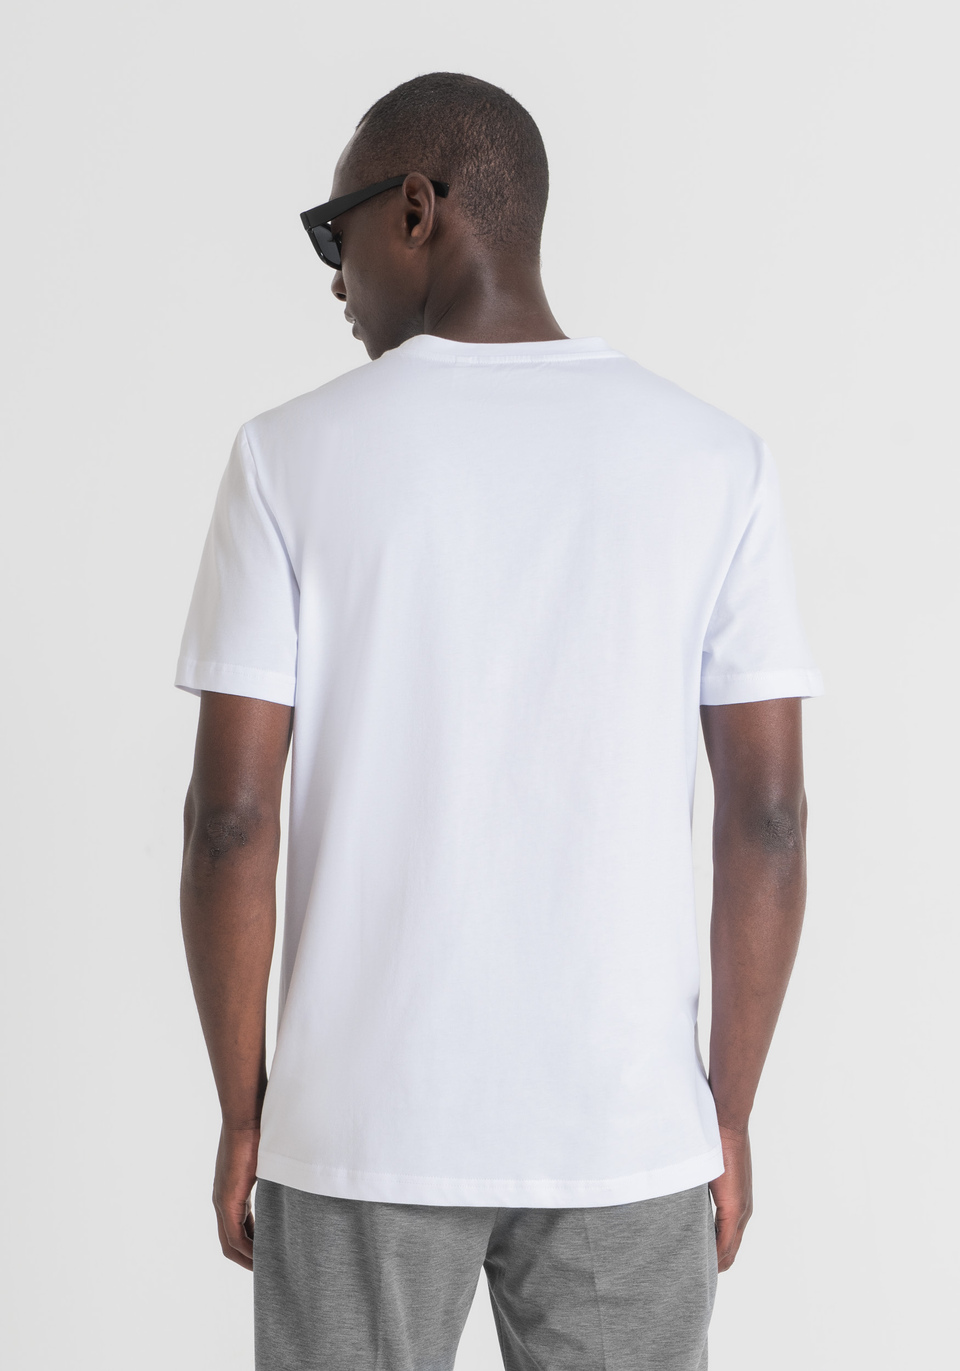 PURE COTTON SLIM FIT T-SHIRT WITH SMOKY EFFECT LOGO - Antony Morato Online Shop